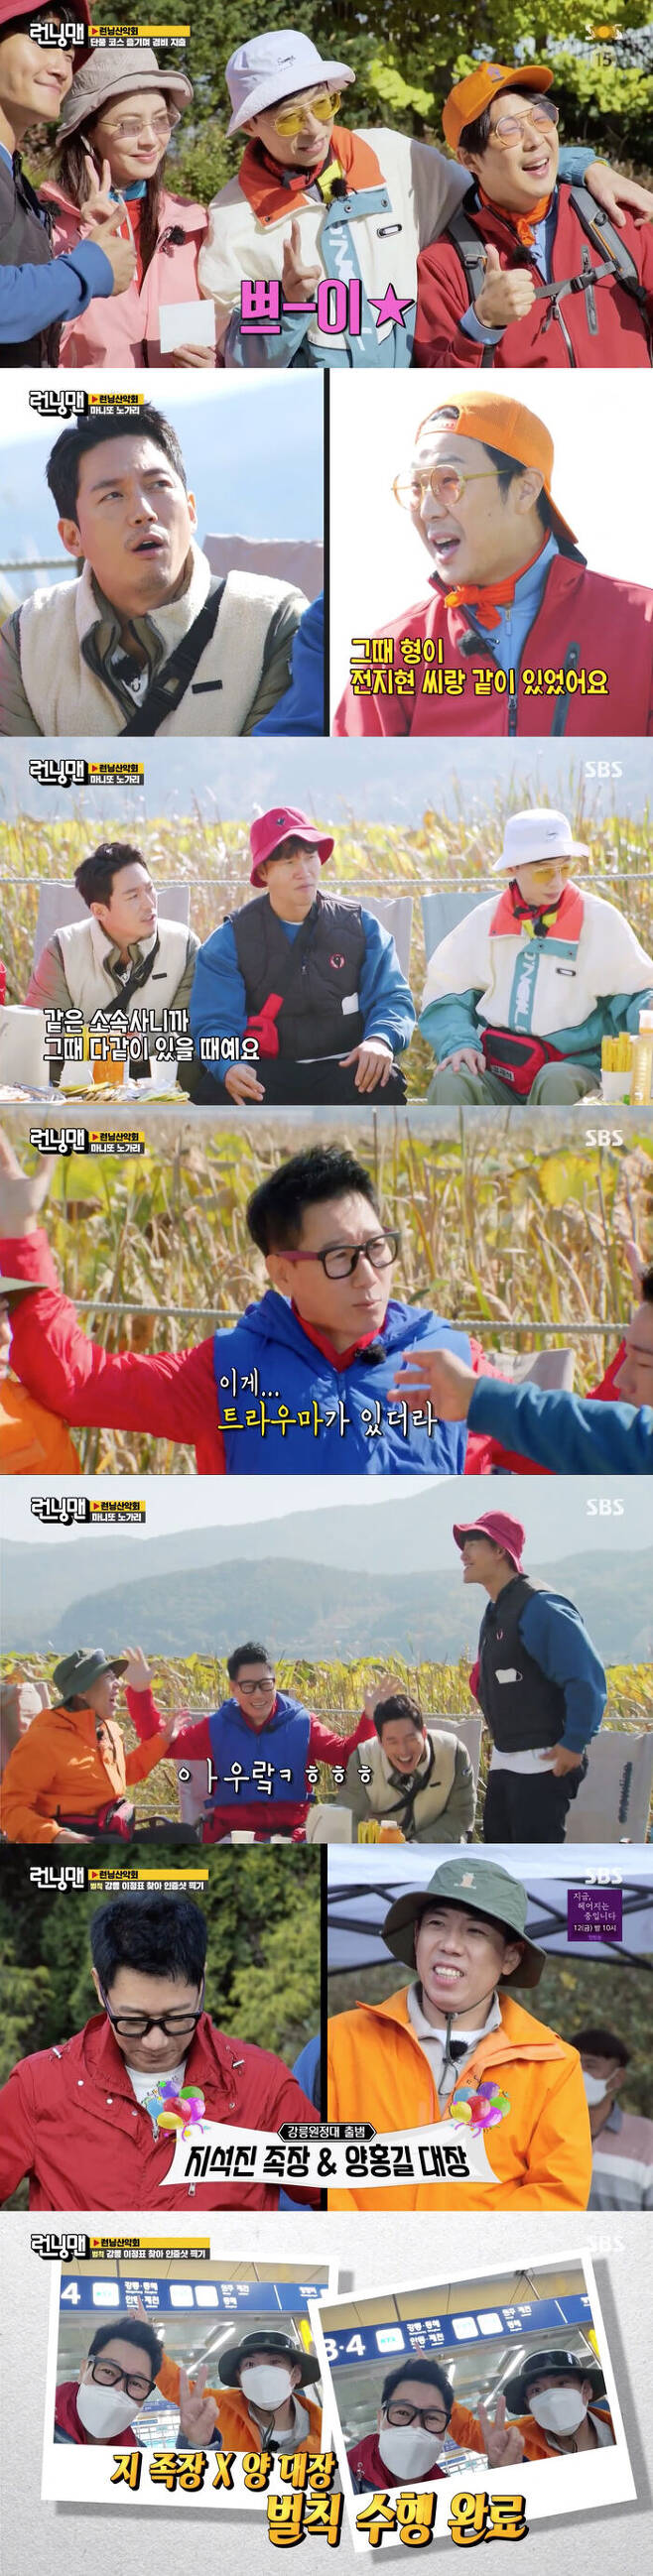 Ji Suk-jin and Yang Se-chan were selected as penalties.On SBS Running Man broadcasted on the 7th, Running Mountaineering Race was held.On this day, Actor Jang Hyuk, who is about to release the movie Gyeonggang Line, opened a race with members and attracted attention.They enjoyed the maple course like a real mountaineering and made memories.And we conducted the Memories We Gon Be Alright mission named after Jang Hyuks masterpiece The Slave Hunters.We Gon Be Alright for 30 minutes If the static flows for more than 5 seconds in the mission, the security is added, and the reaction to each others story is to be re-acted and who the pair is.The members continued to talk about the story so that the topic of the story would not be cut off. Haha asked Jang Hyuk who was the most beautiful opponent he had ever met.Then Jang Hyuk replied, It was all pretty.The members asked me to choose only one, and Jang Hyuk said, Oh, it was beautiful.Haha also released an episode of his first meeting with Jang Hyuk; Haha, who saw Jang Hyuk at a movie theater in Samseong-dong, said he was with Jeon at the time.Yoo Jae-Suk said, Oh, was it the same agency? And Jang Hyuk also explained, It is time to be together because it is the same agency.Ji Suk-jin commented on Actor Bae Yong-joon, who said: Bae Yong-joon had it.There is trauma, said Kim Jong-kook, who said, What kind of Bae Yong-joon brother did you almost get hit? And Ji Suk-jin said, Are you a fall song? and misrepresented it as Bae Yong-joons winter song.He then met Bae Yong-joon at a Wedding ceremony and pointed out Yoo Jae-Suk, Is he younger than me?No, its the same age as you. He laughed again and made a mistake.The members finished the Slave Hunters mission and found all of their Manito and succeeded in scoring.However, Jang Hyuk was deducted by pointing the wrong opponent to Manito alone.Kim Jong-kook said, He is the most common person I know.Penalties were released before all missions were over and final numbers were announced. Todays penalty is Gyeonggang Line milestones to take a certified shot.When the penalty was released, the members Oneness continued, but I desperately hoped that I would not win the penalty because I thought it was not just myself.The penalty was Ji Suk-jin and Yang Se-chan, who went a long way to find the gyeonggang Line milestone.The Gyeonggang Line milestone, which is not visible at all, found that Yang Se-chan had a Gyeonggang Line line at nearby Yangpyeong Station.So they went to Yangpyeong Station with hope, and there they found the Gyeonggang Line milestone and succeeded in carrying out the penalty safely.At the end of the broadcast, the appearance of SUfa leaders such as Honey Jay, Aiki, Monica, and Ri Jung was announced, raising expectations for the next broadcast.